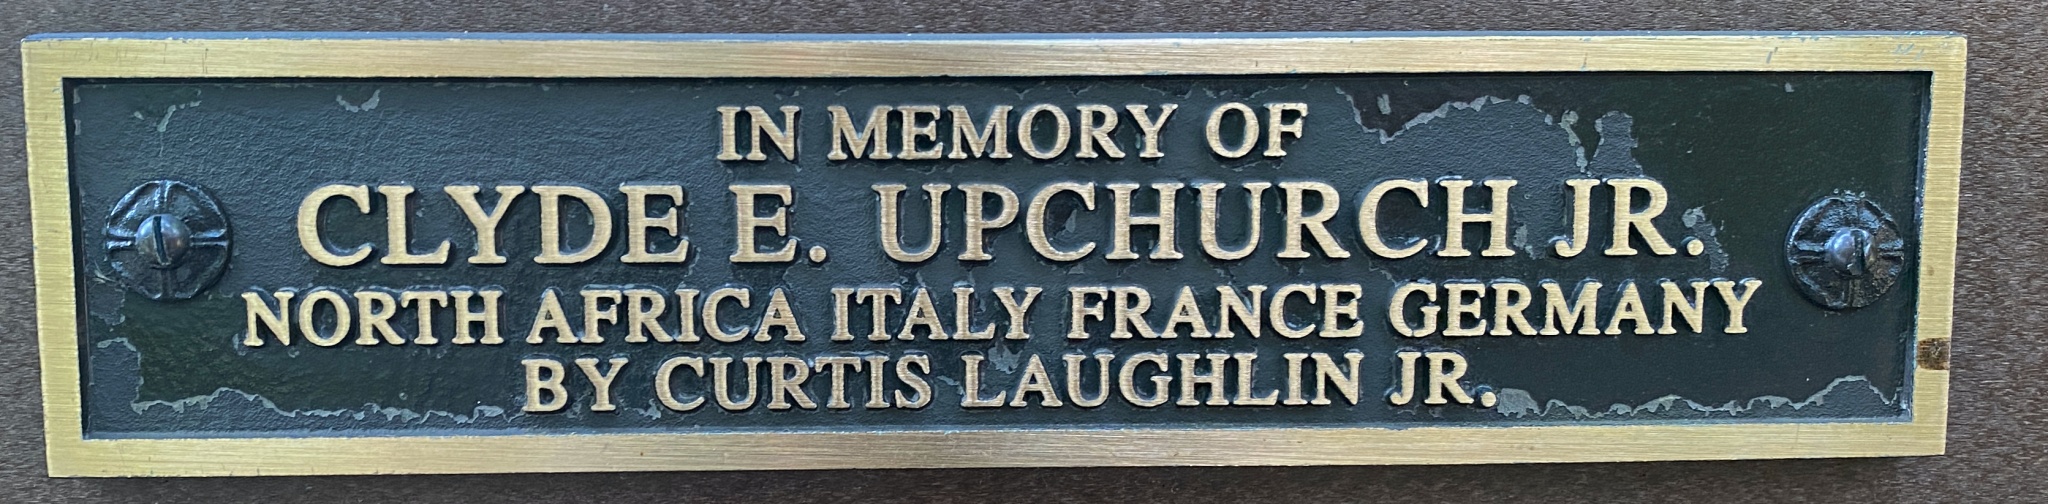 IN MEMORY OF  CLYDE E. UPCHURCH JR. NORTH AFRICA ITALY FRANCE GERMANY BY Curtis Laughlin JR.